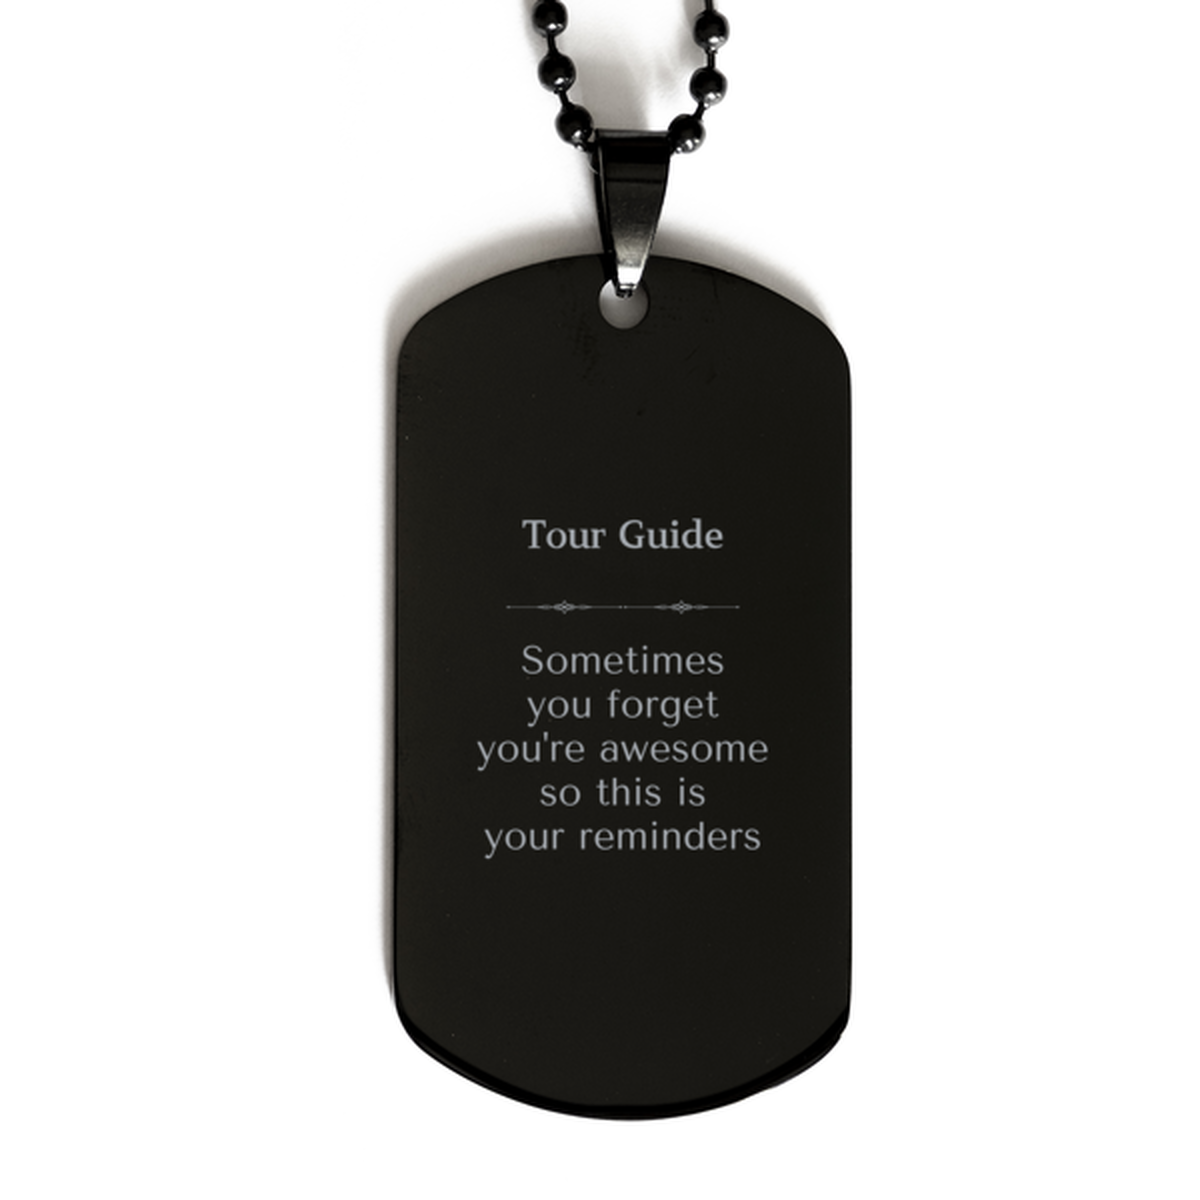 Sentimental Tour Guide Black Dog Tag, Tour Guide Sometimes you forget you're awesome so this is your reminders, Graduation Christmas Birthday Gifts for Tour Guide, Men, Women, Coworkers